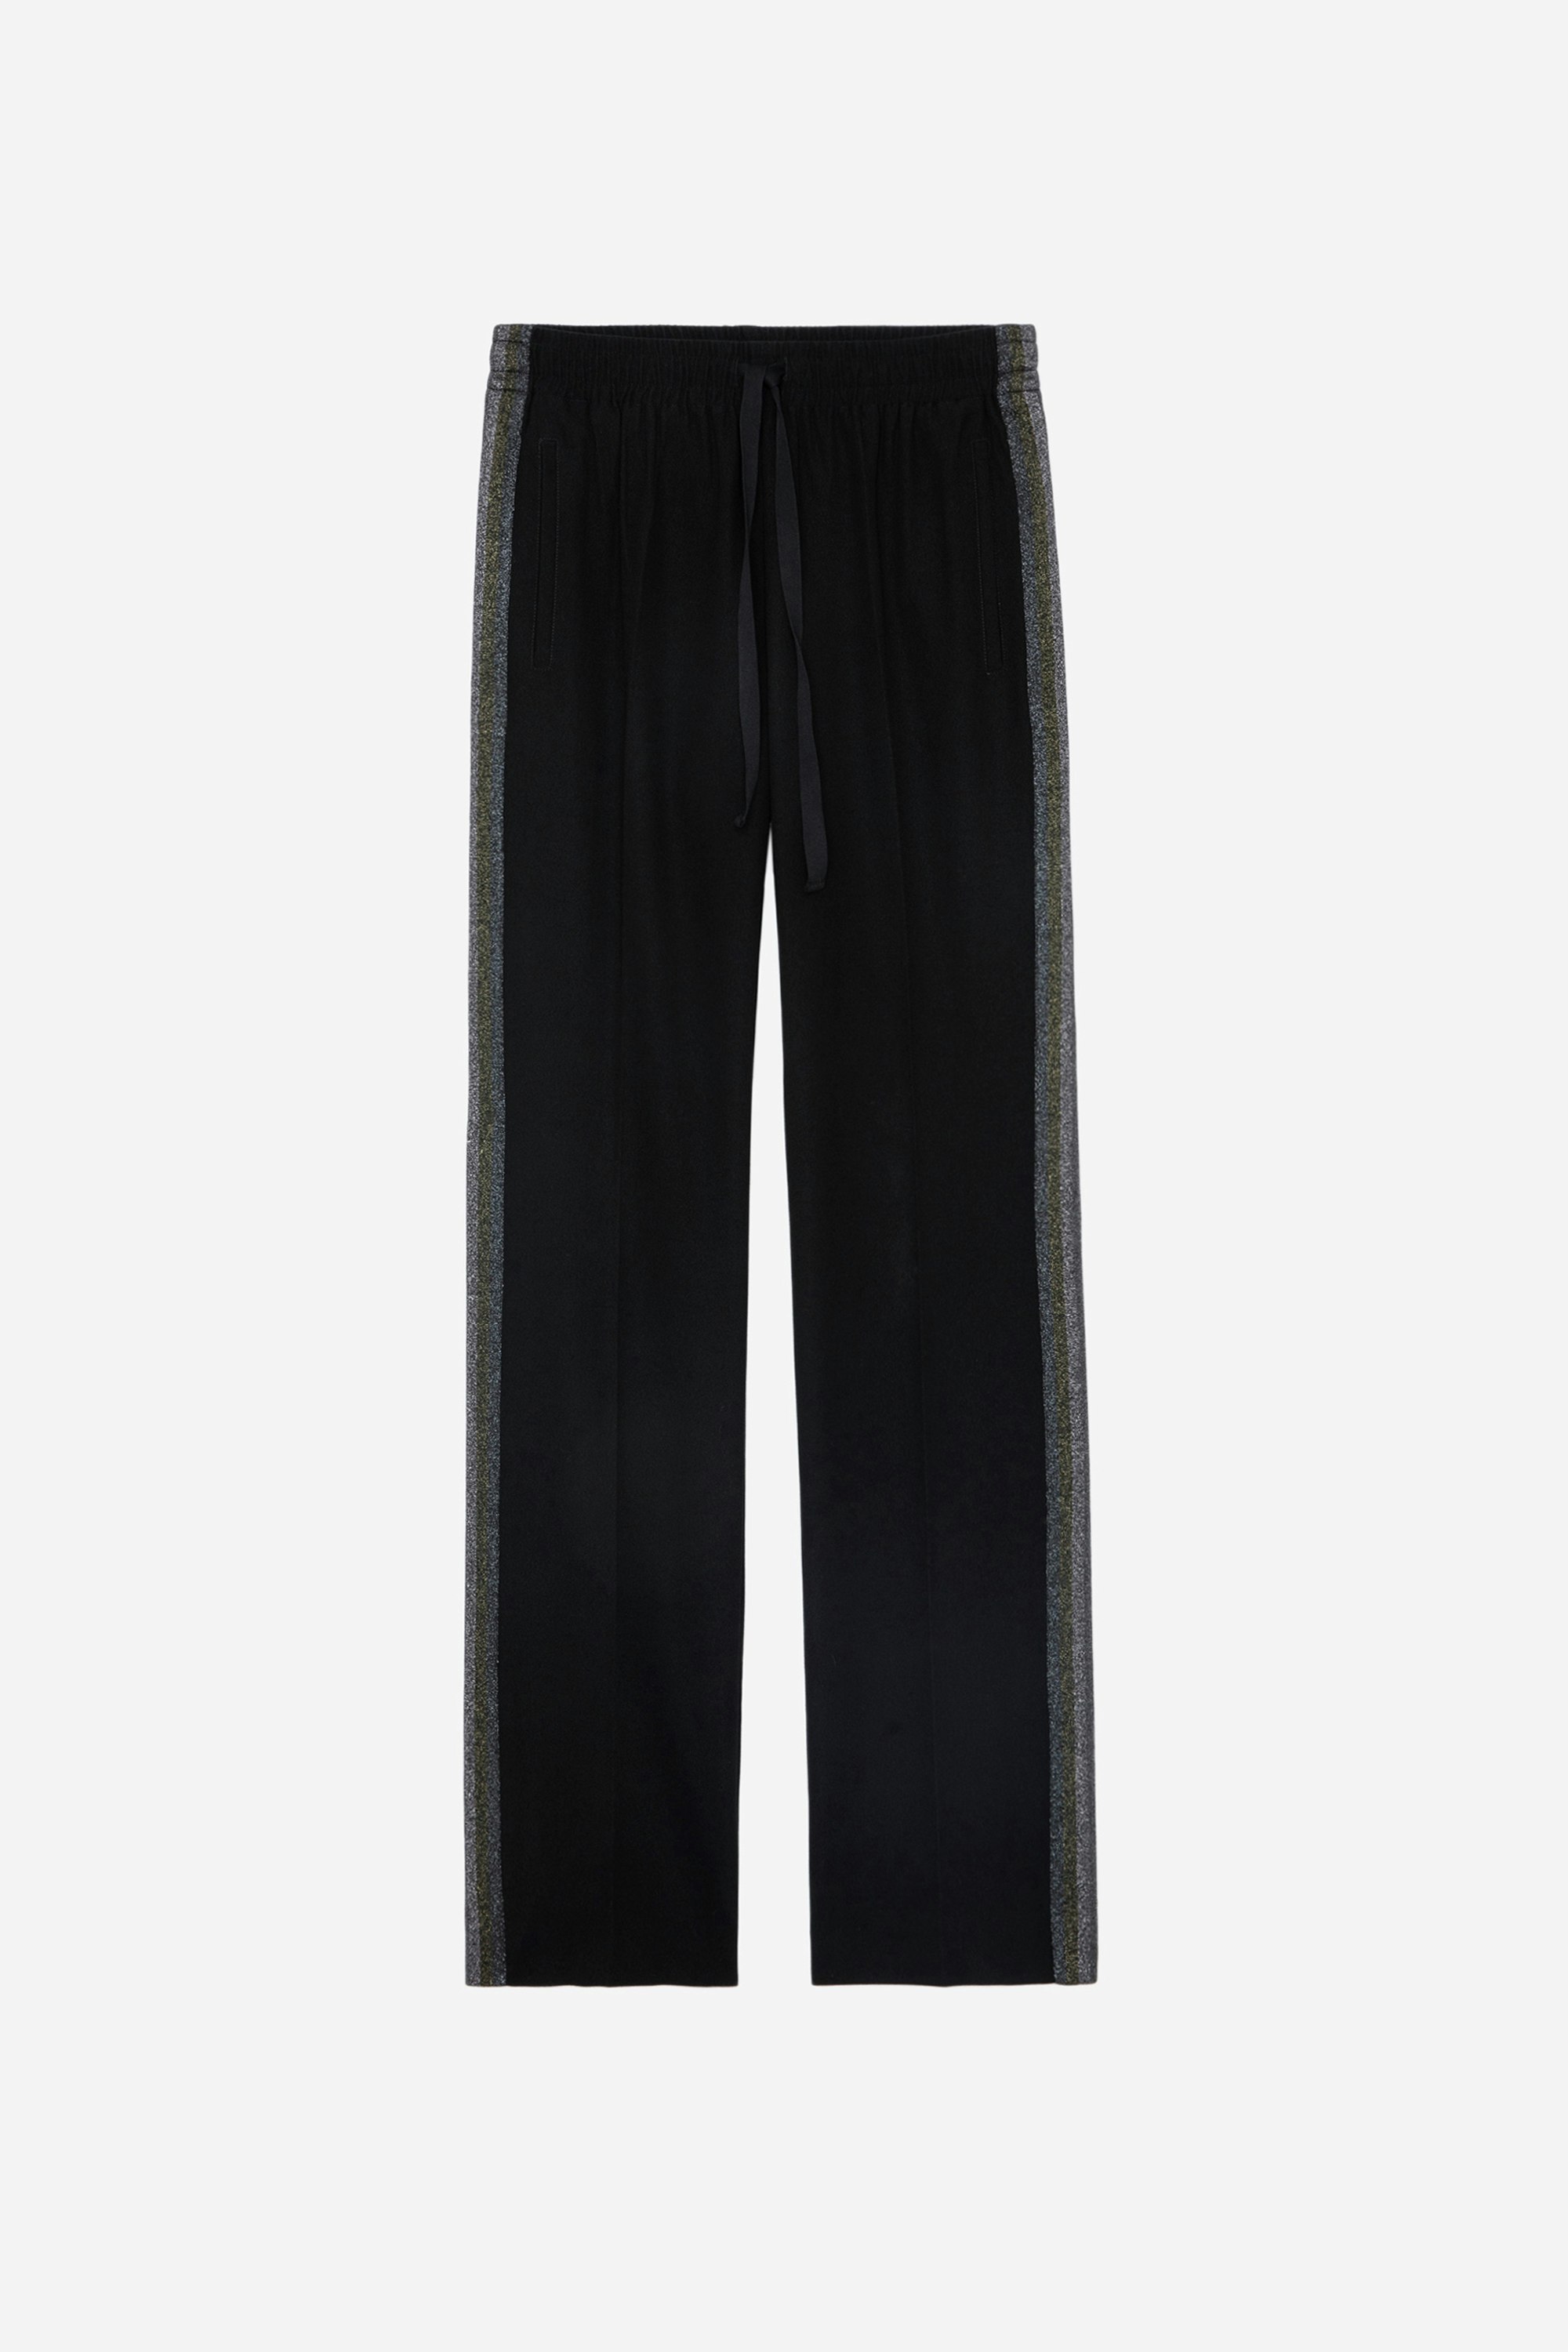 Pomy Pants - Women's black trousers with glittery side bands